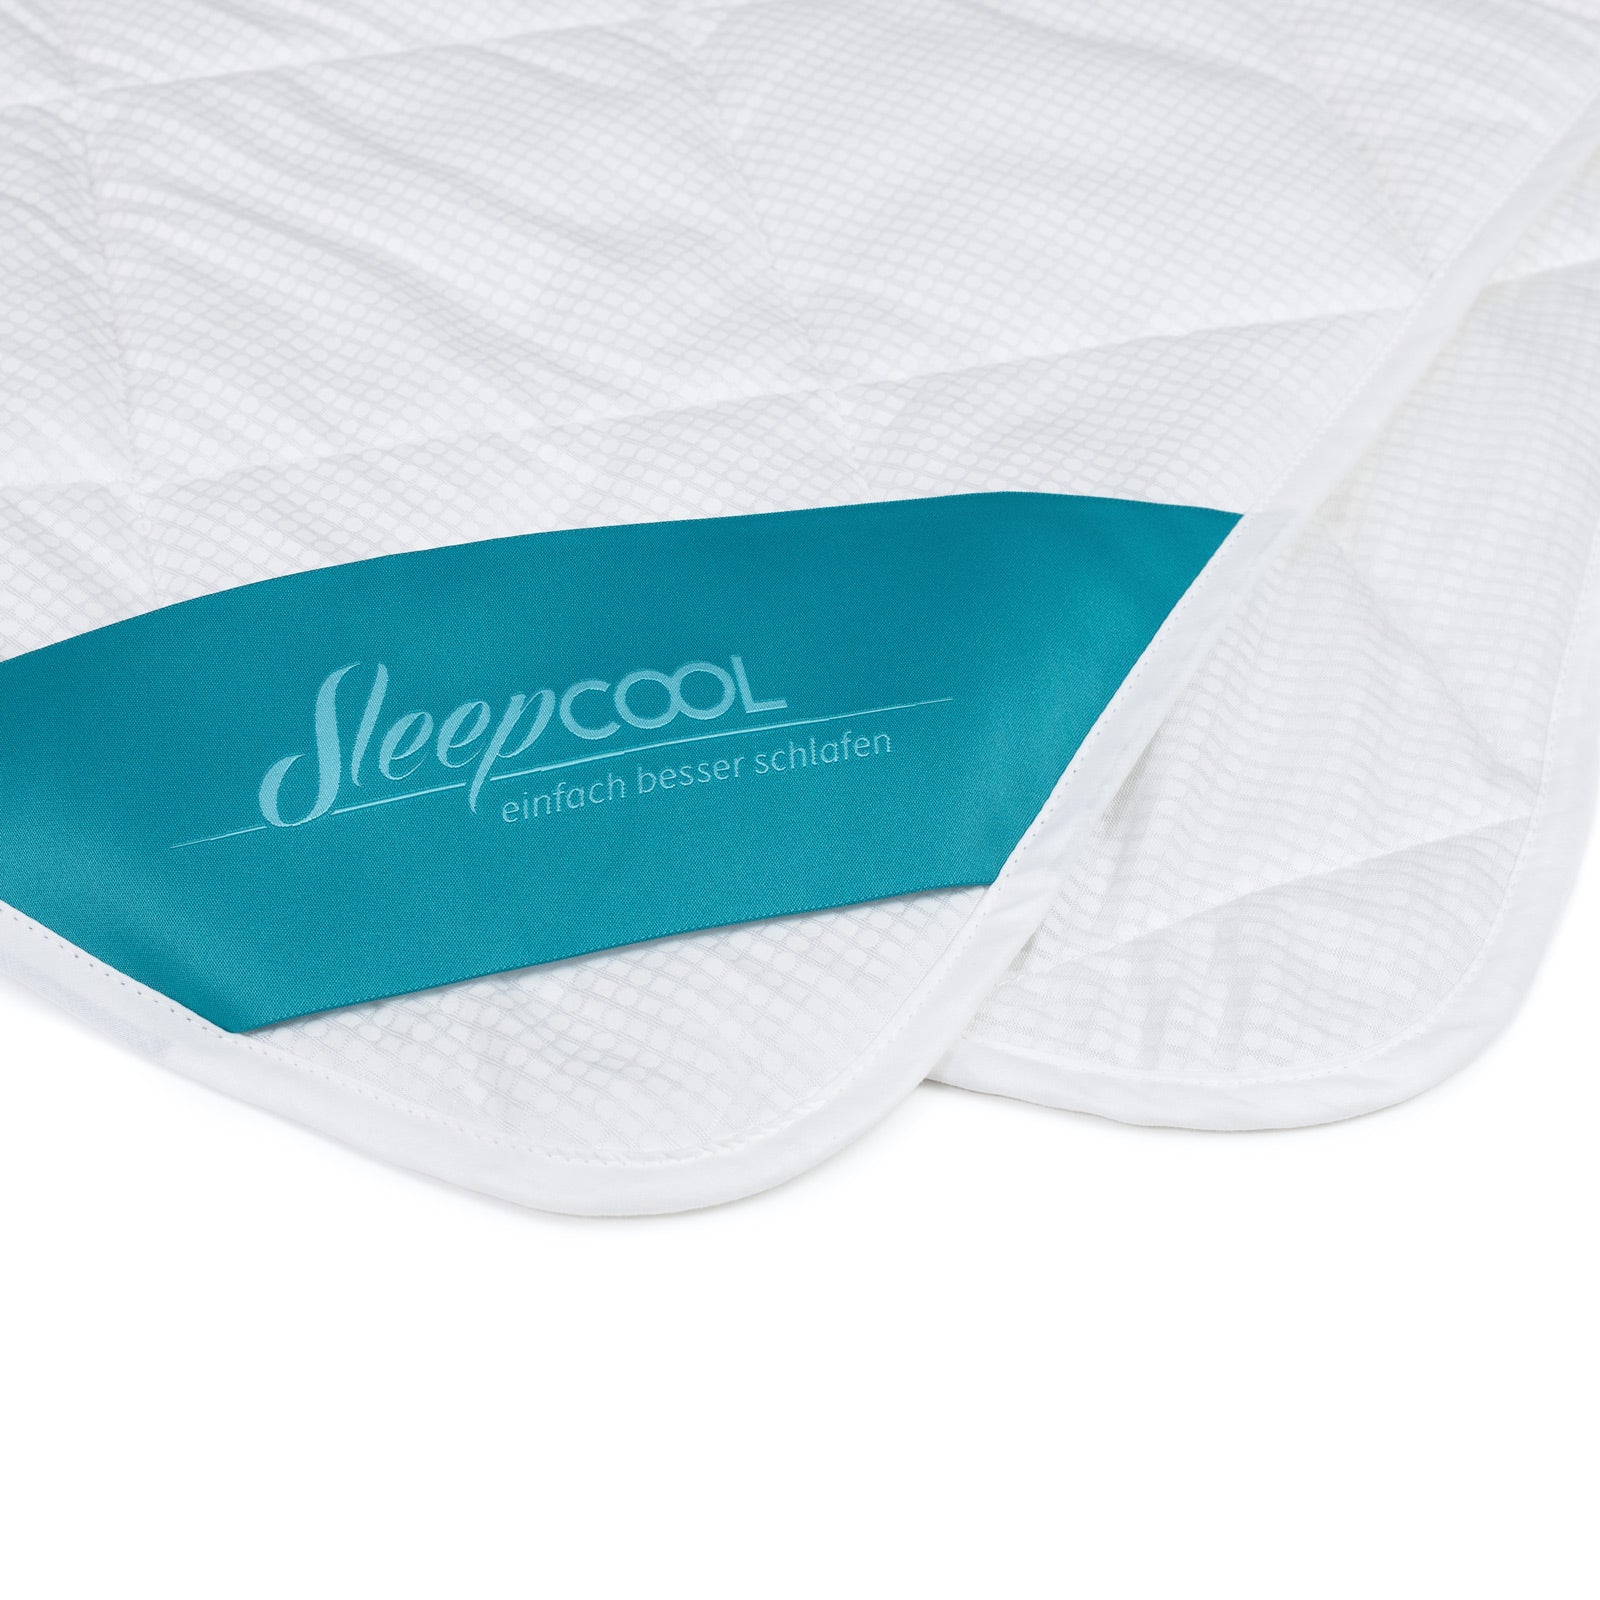 Temperature-regulating Duvet (400g-490g) COOL.EMOTIONS - lightweight, breathable Quilt - not too warm, not too cold